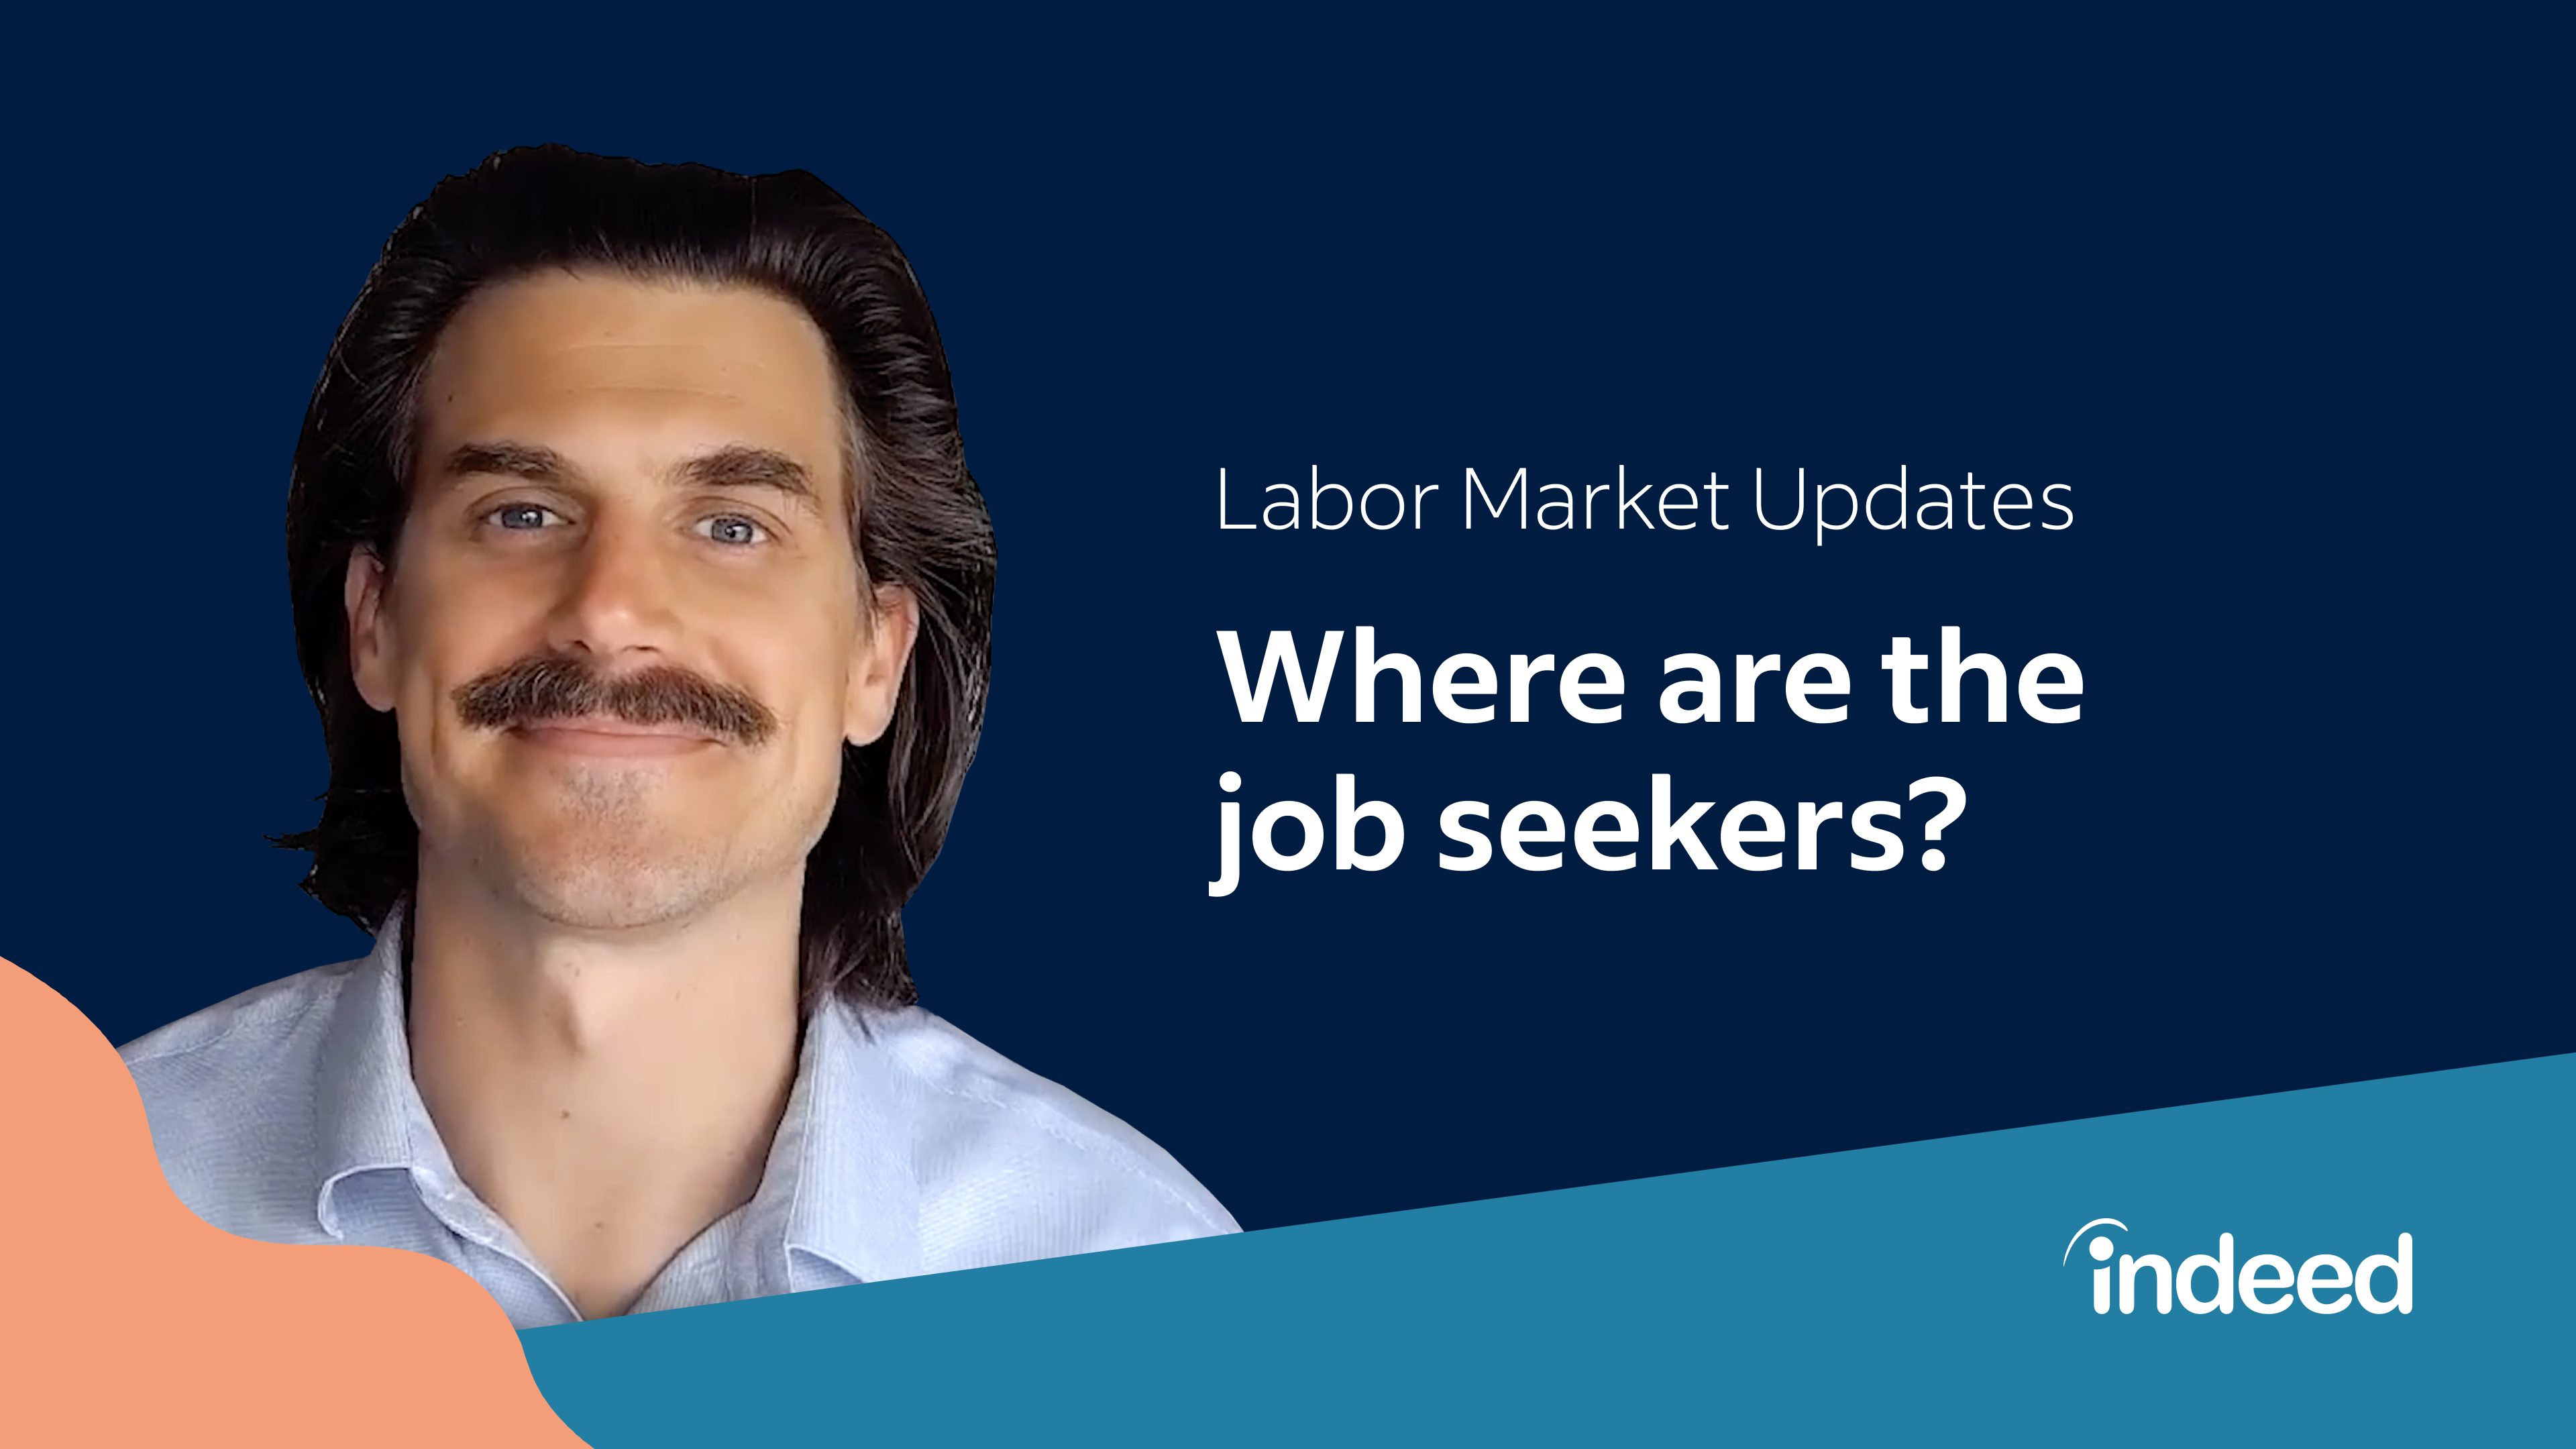 header photo titled "labor market update where are the job seekers?"